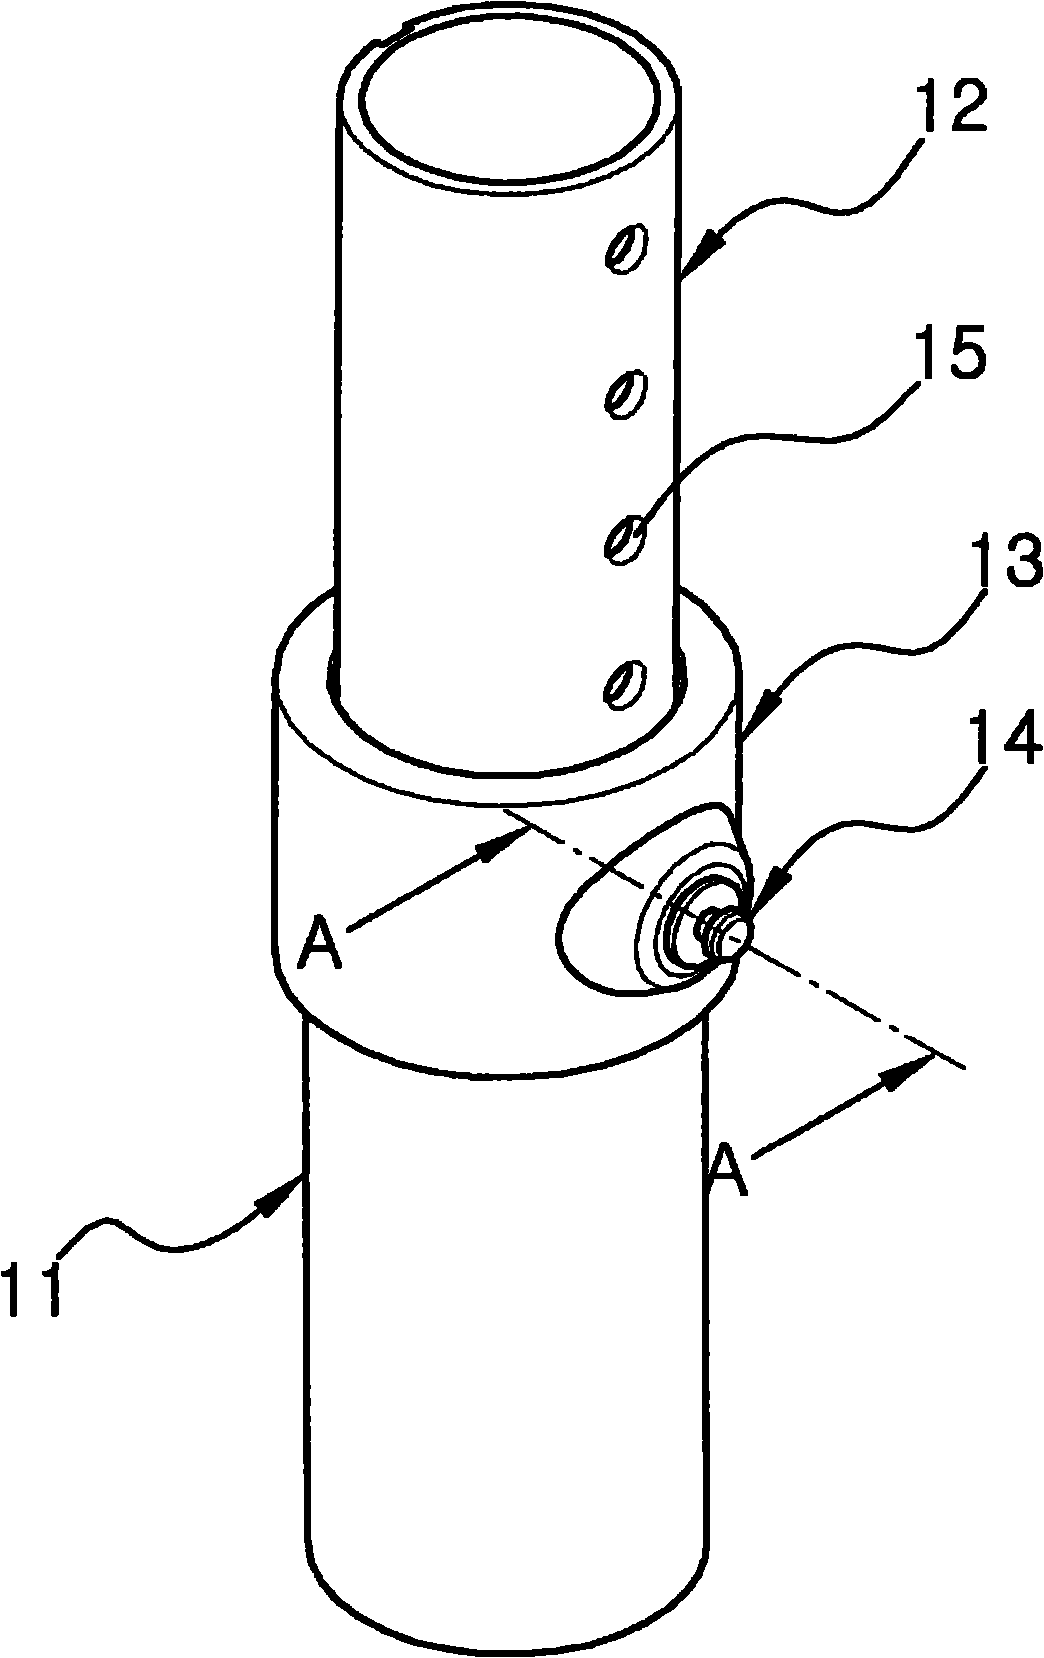 Height control device for saddle or handlebar of bicycle